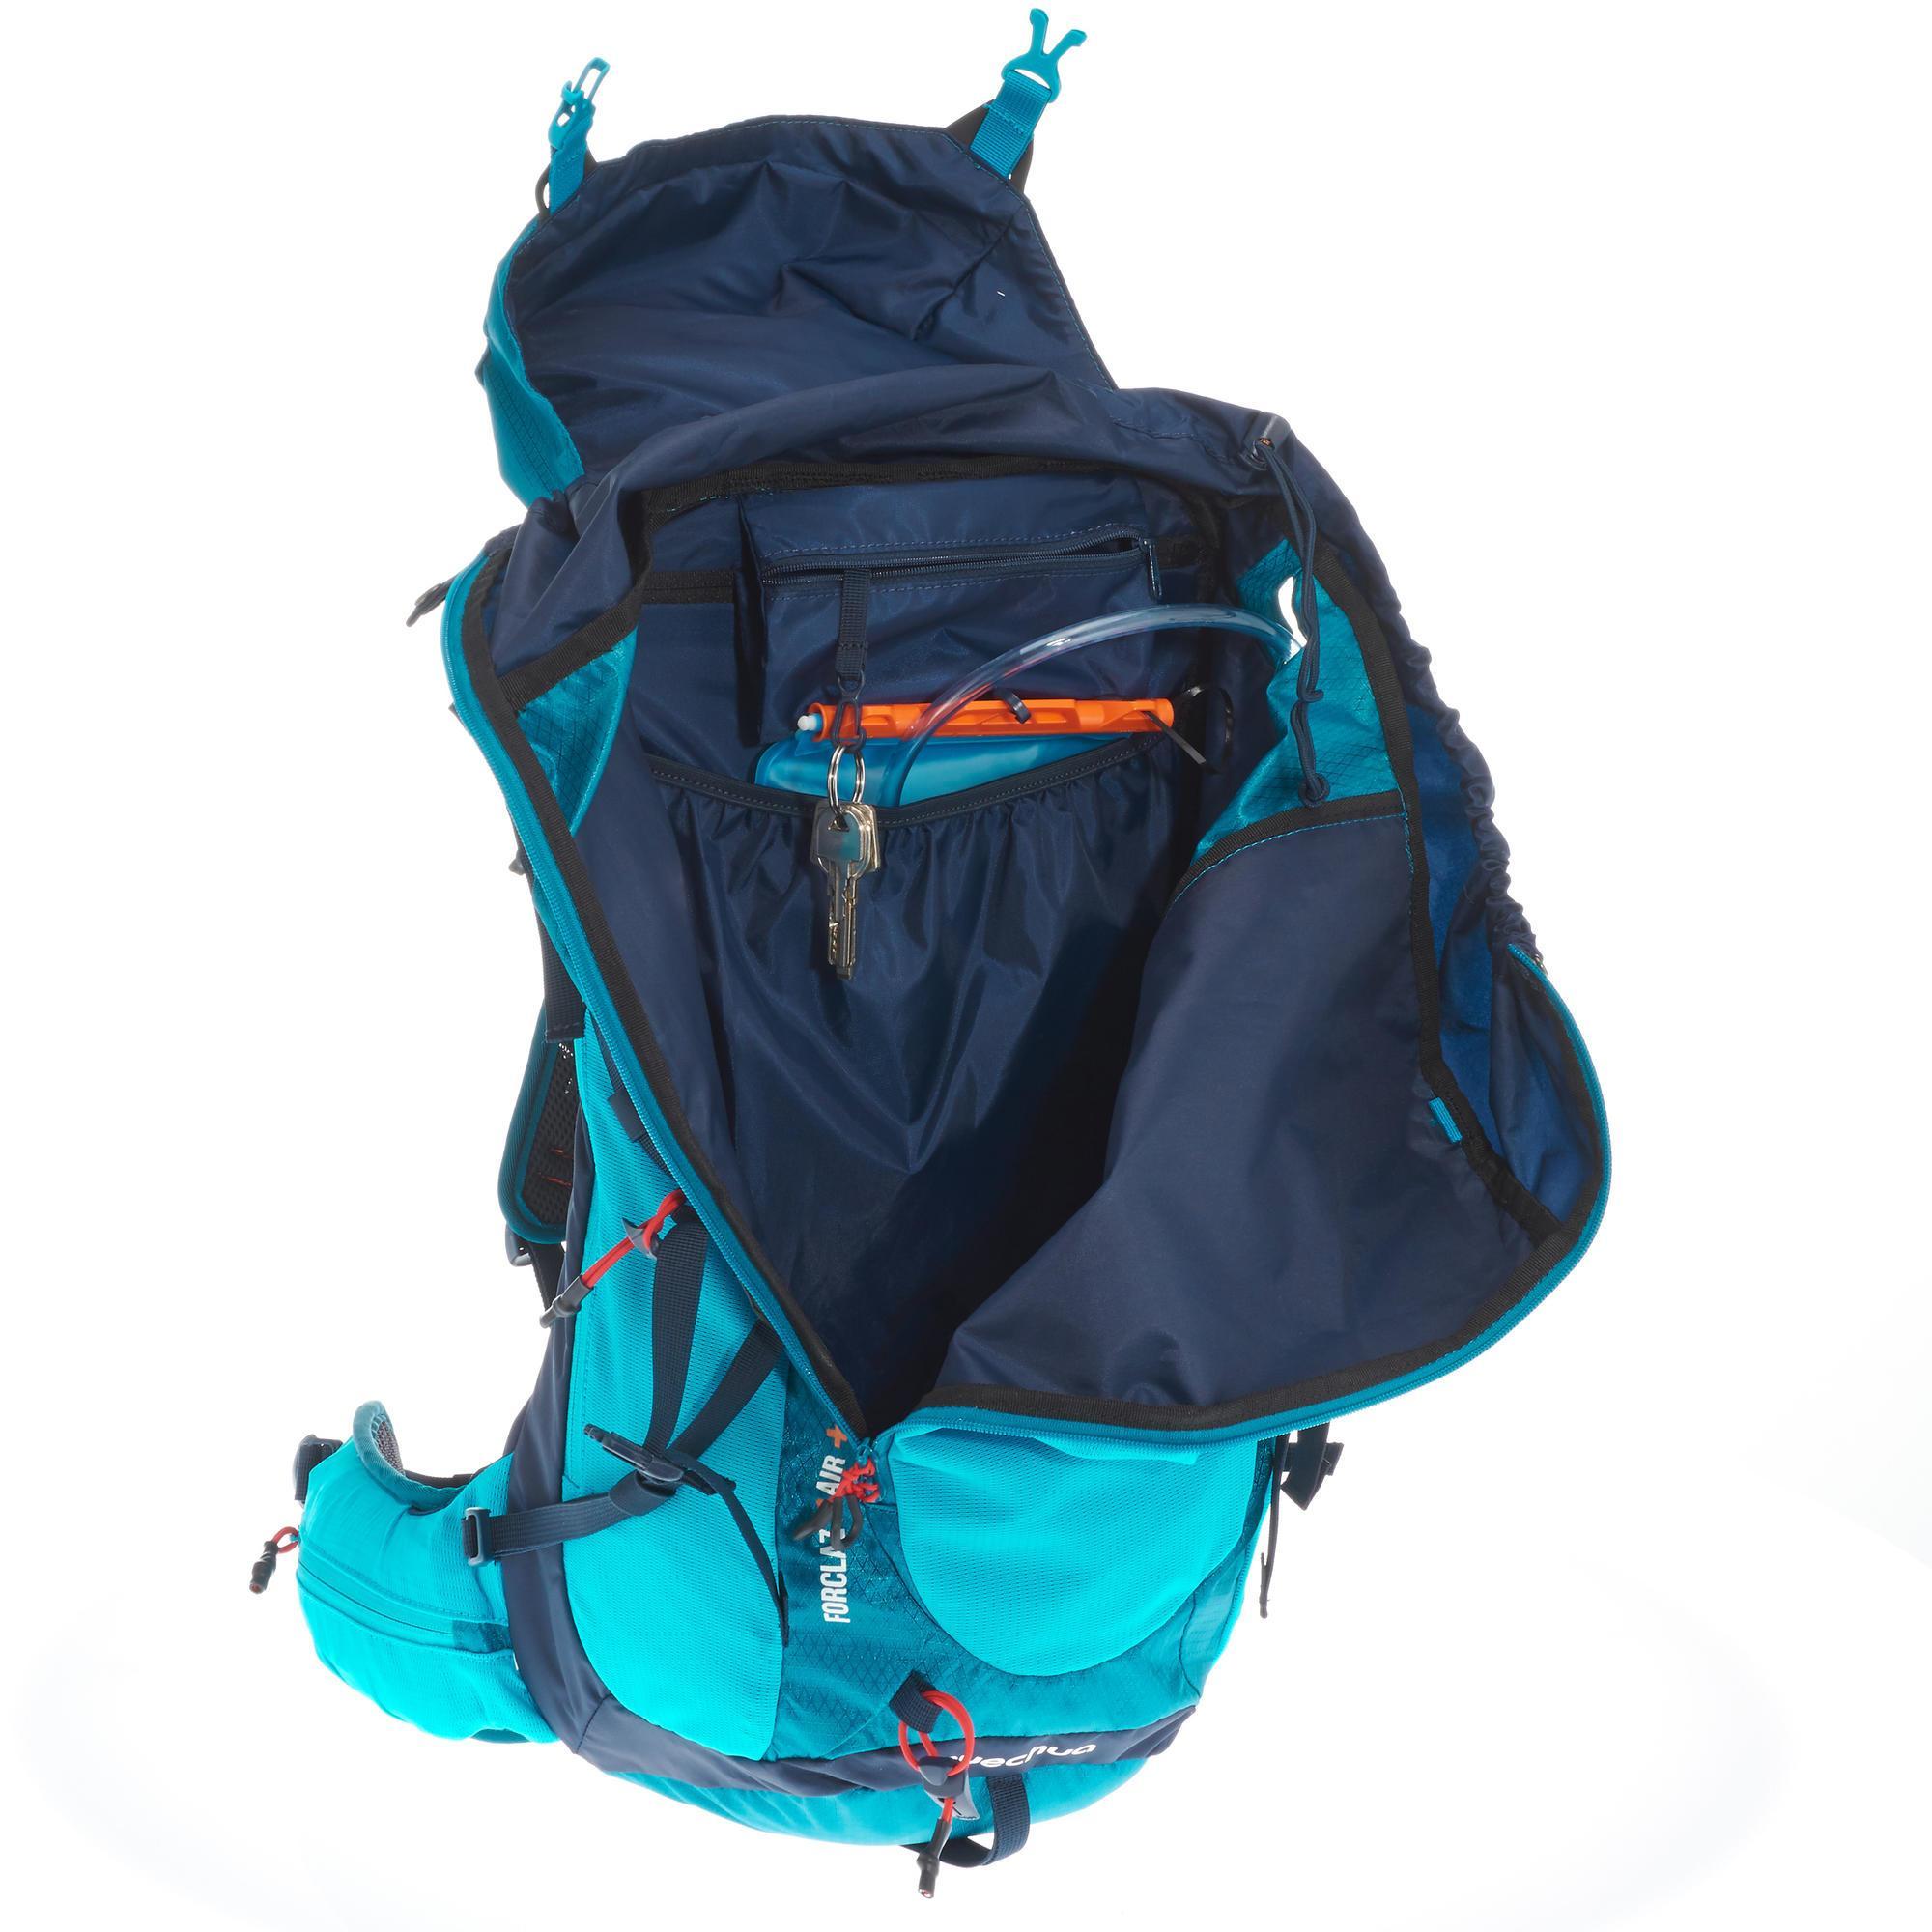 MH500 30 LITRE MOUNTAIN HIKING BACKPACK 